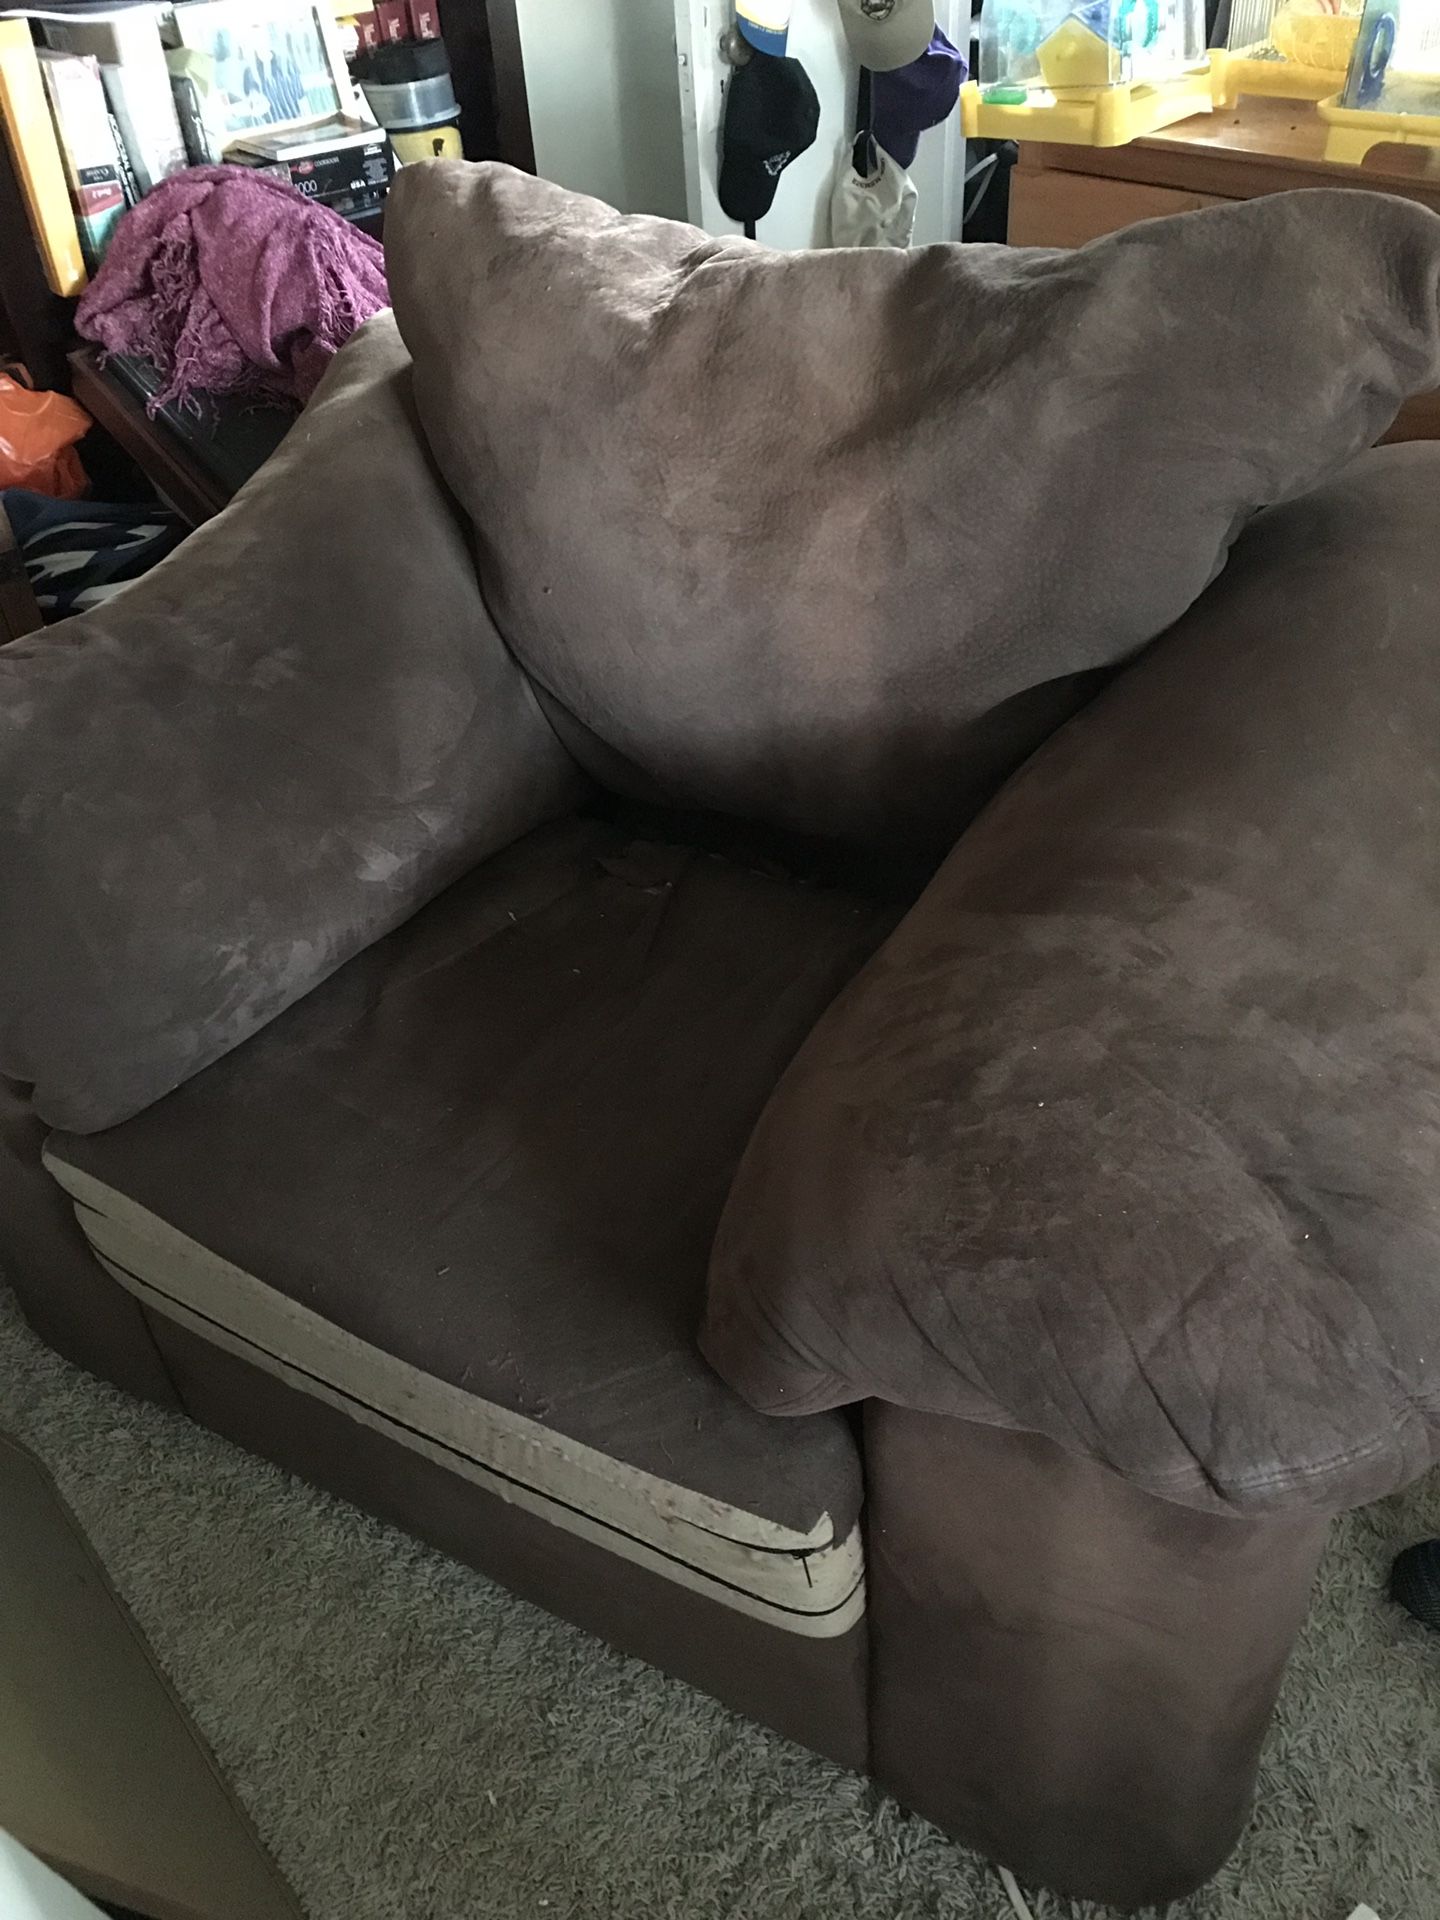 Oversized Chair- needs to be reupholstered